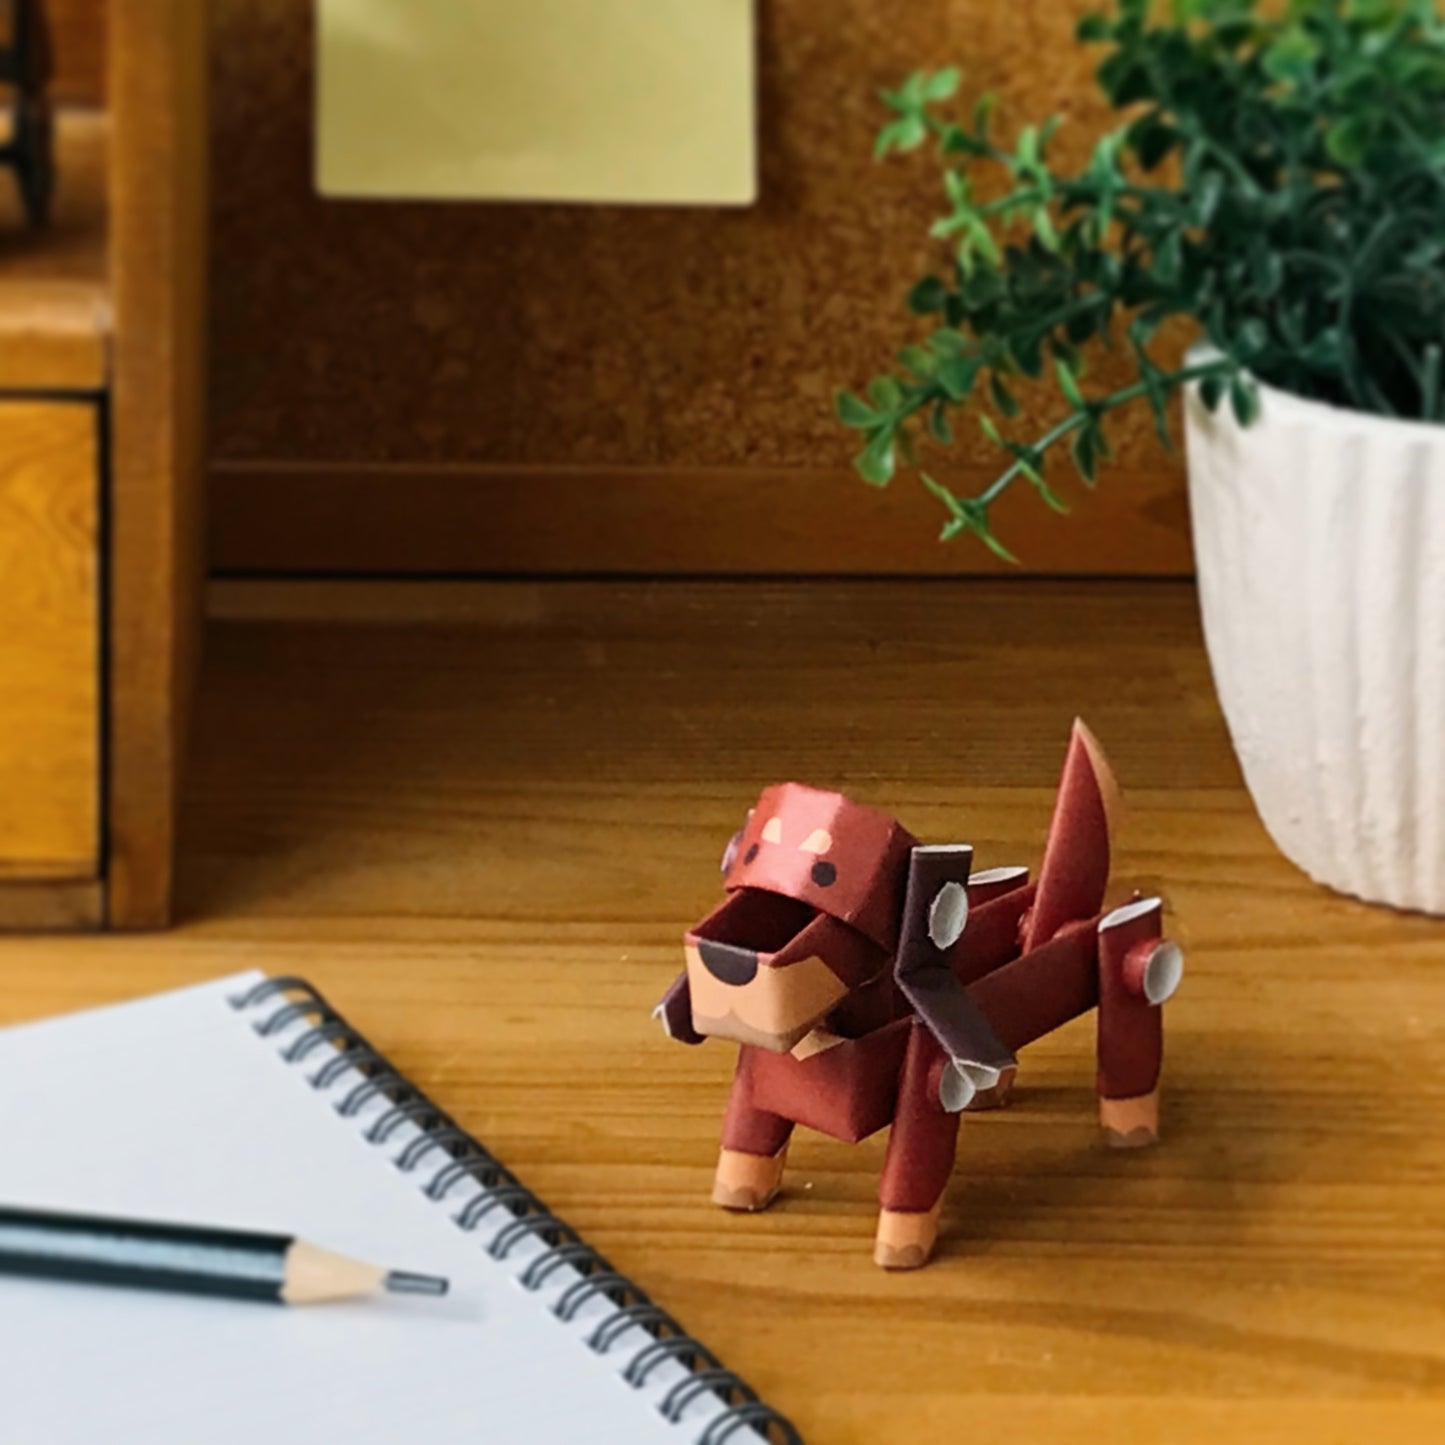 Dachshund from Piperoid Japan - finished product